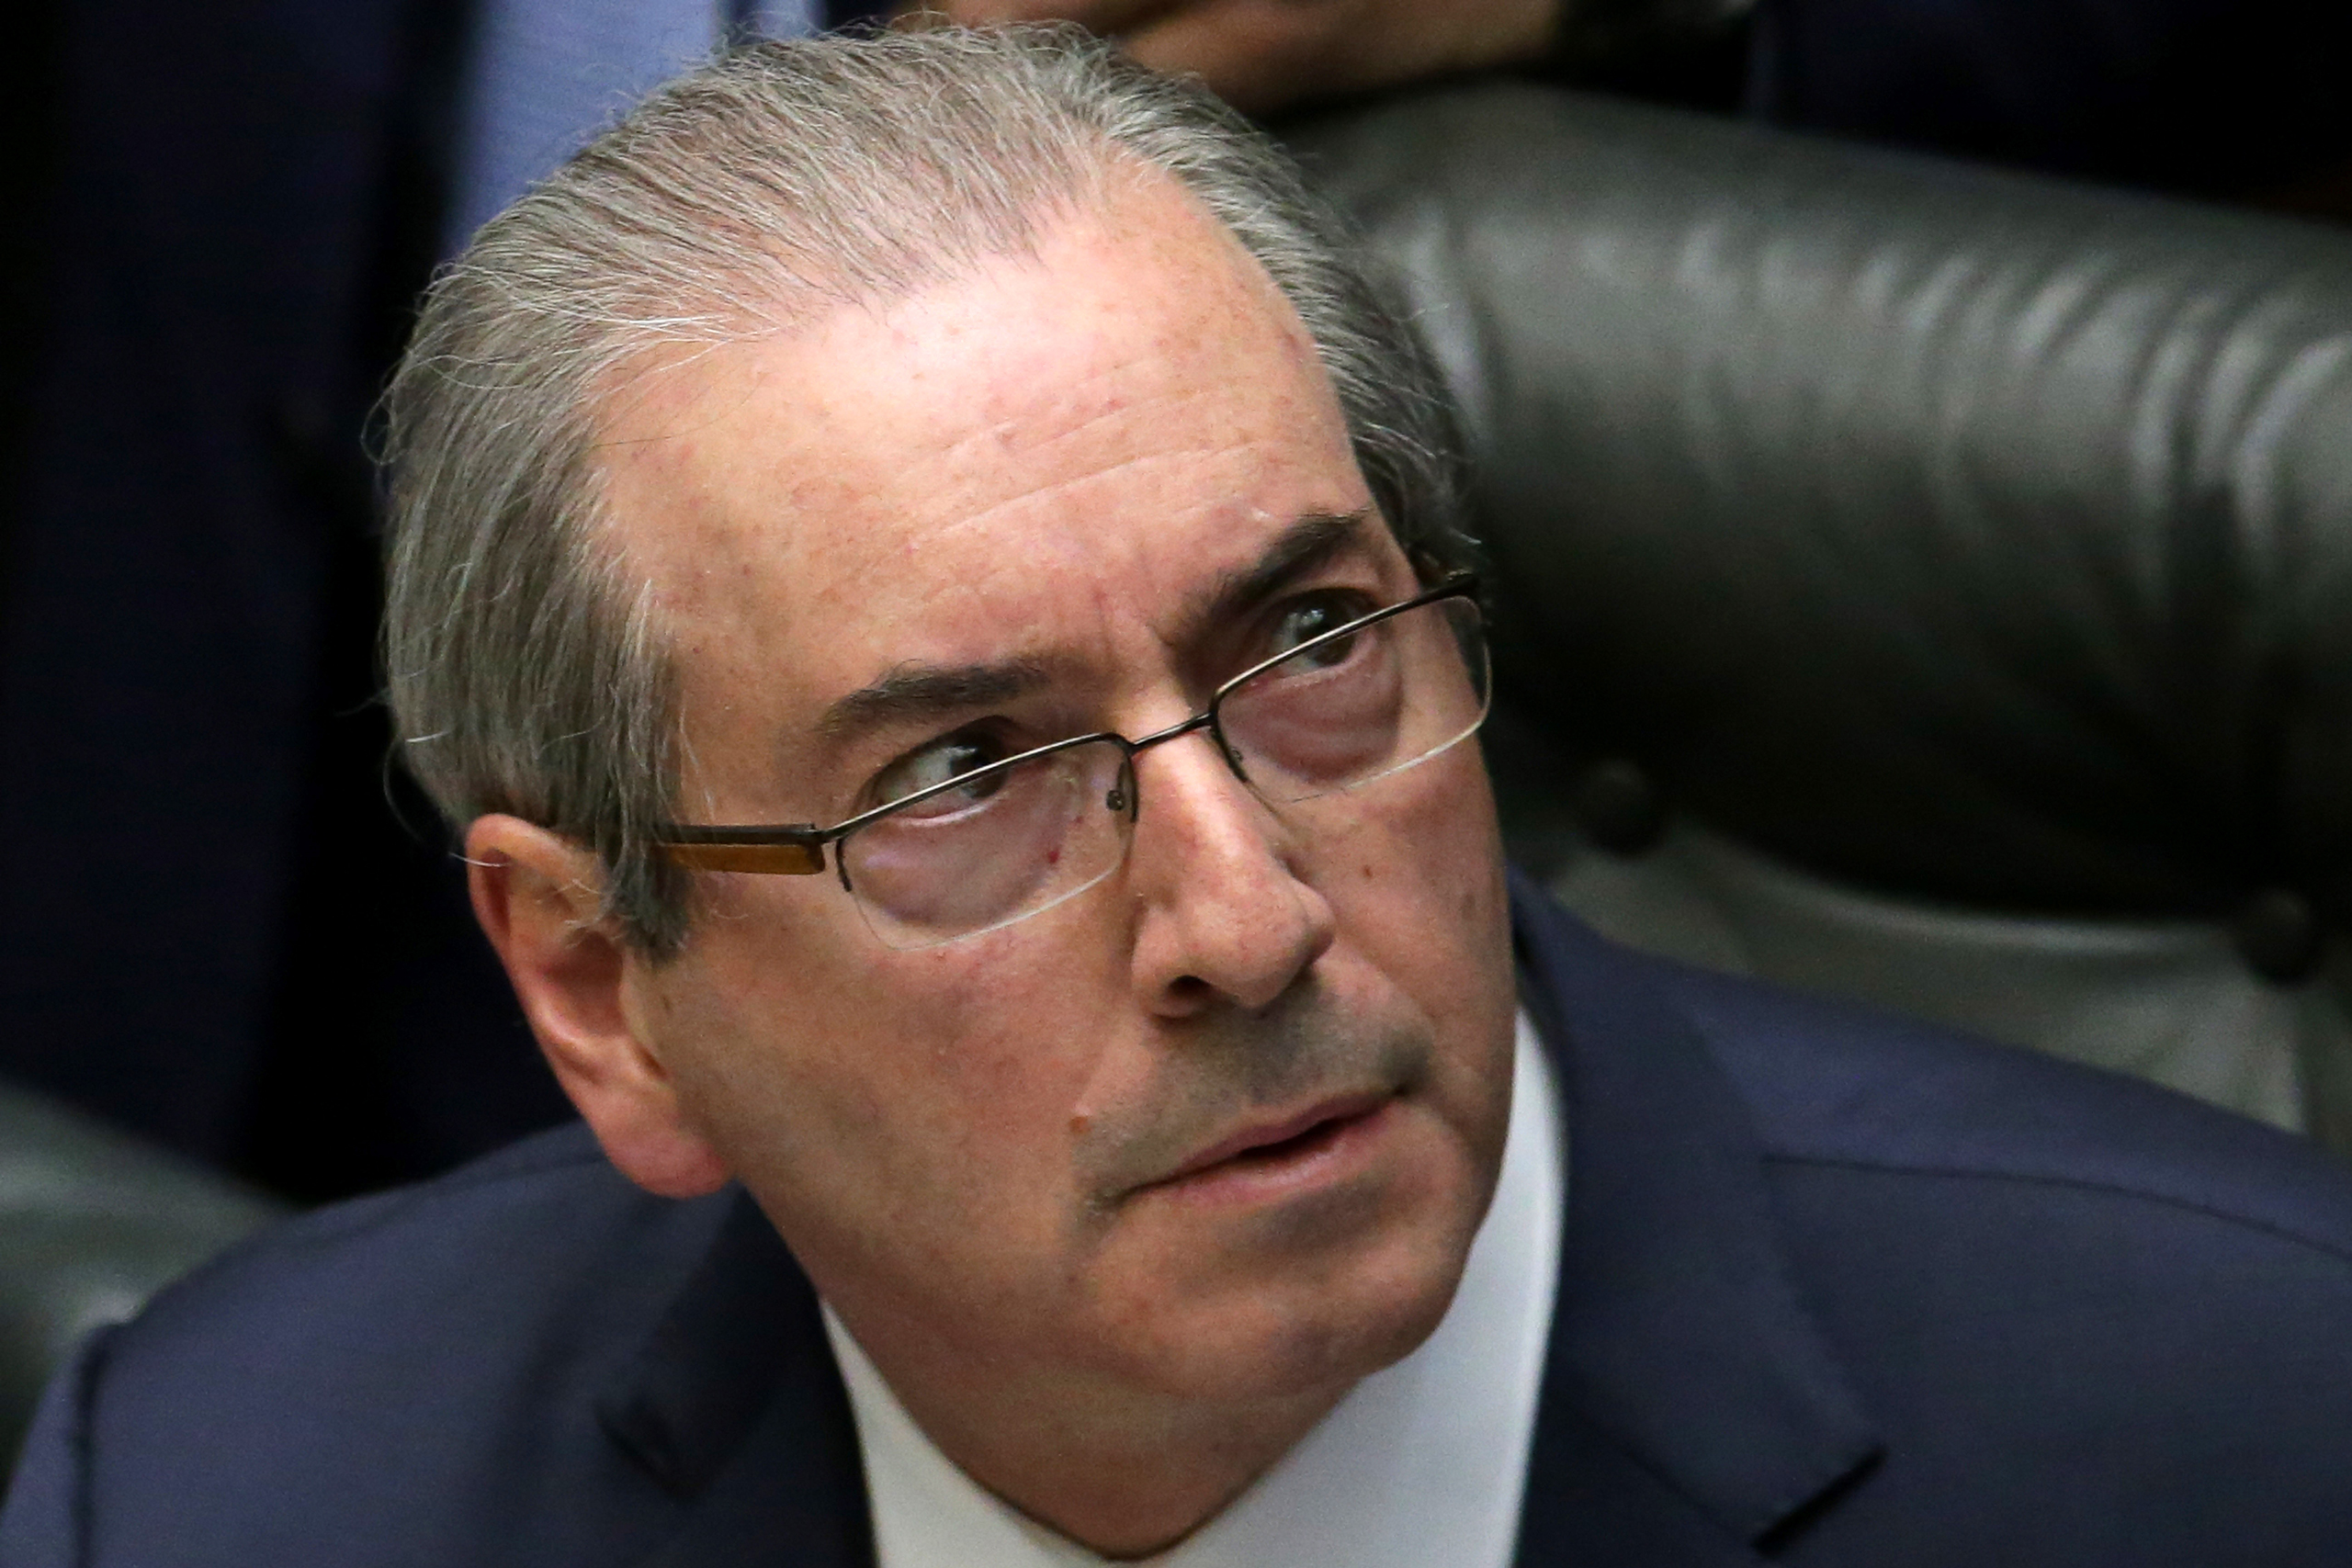 FILE - In this April 15, 2016 file photo, House Speaker Eduardo Cunha attends a debate on whether or not to impeach the president, at the Chamber of Deputies in Brasilia, Brazil. A justice on Brazil’s supreme court suspended Cunha, which temporarily removes him. He’s been leading the effort to impeach President Dilma Rousseff but himself faces a long list of corruption allegations and is accused by Brazil’s chief-prosecutor of obstructing justice. (AP Photo/Eraldo Peres, File)